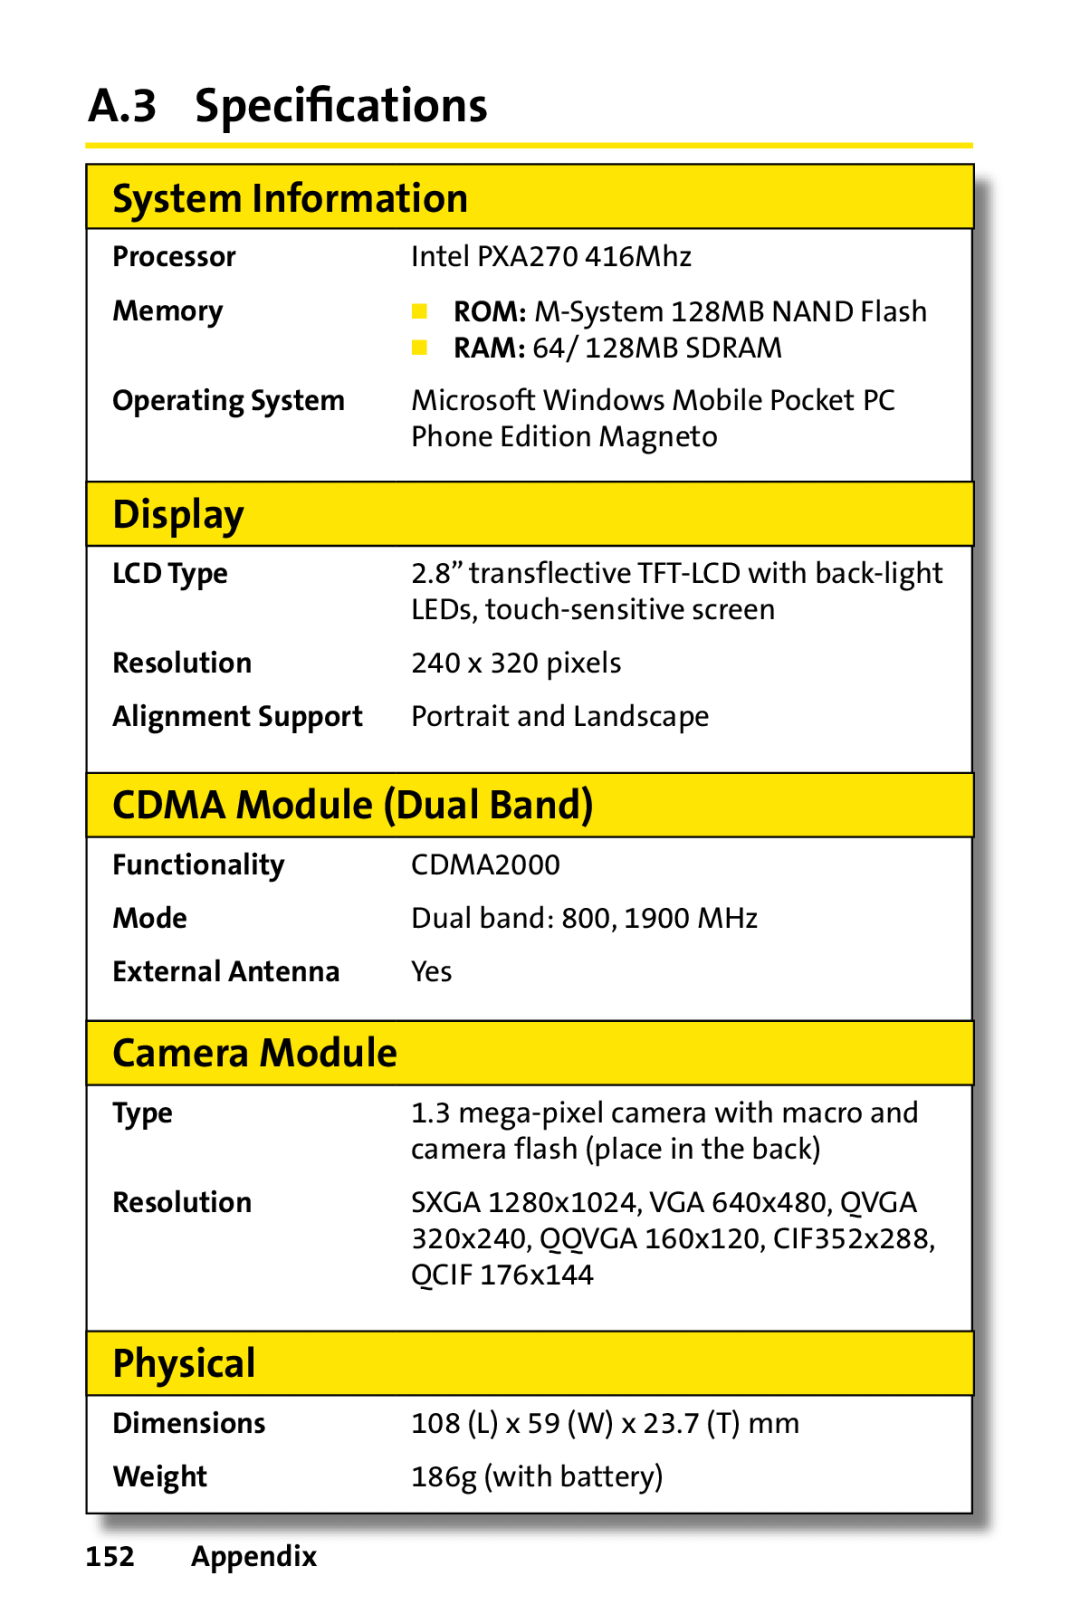 Sprint Nextel PPC-6700 A.3 Speciﬁcations, System Information, Display, CDMA Module Dual Band, Physical, Camera Module 